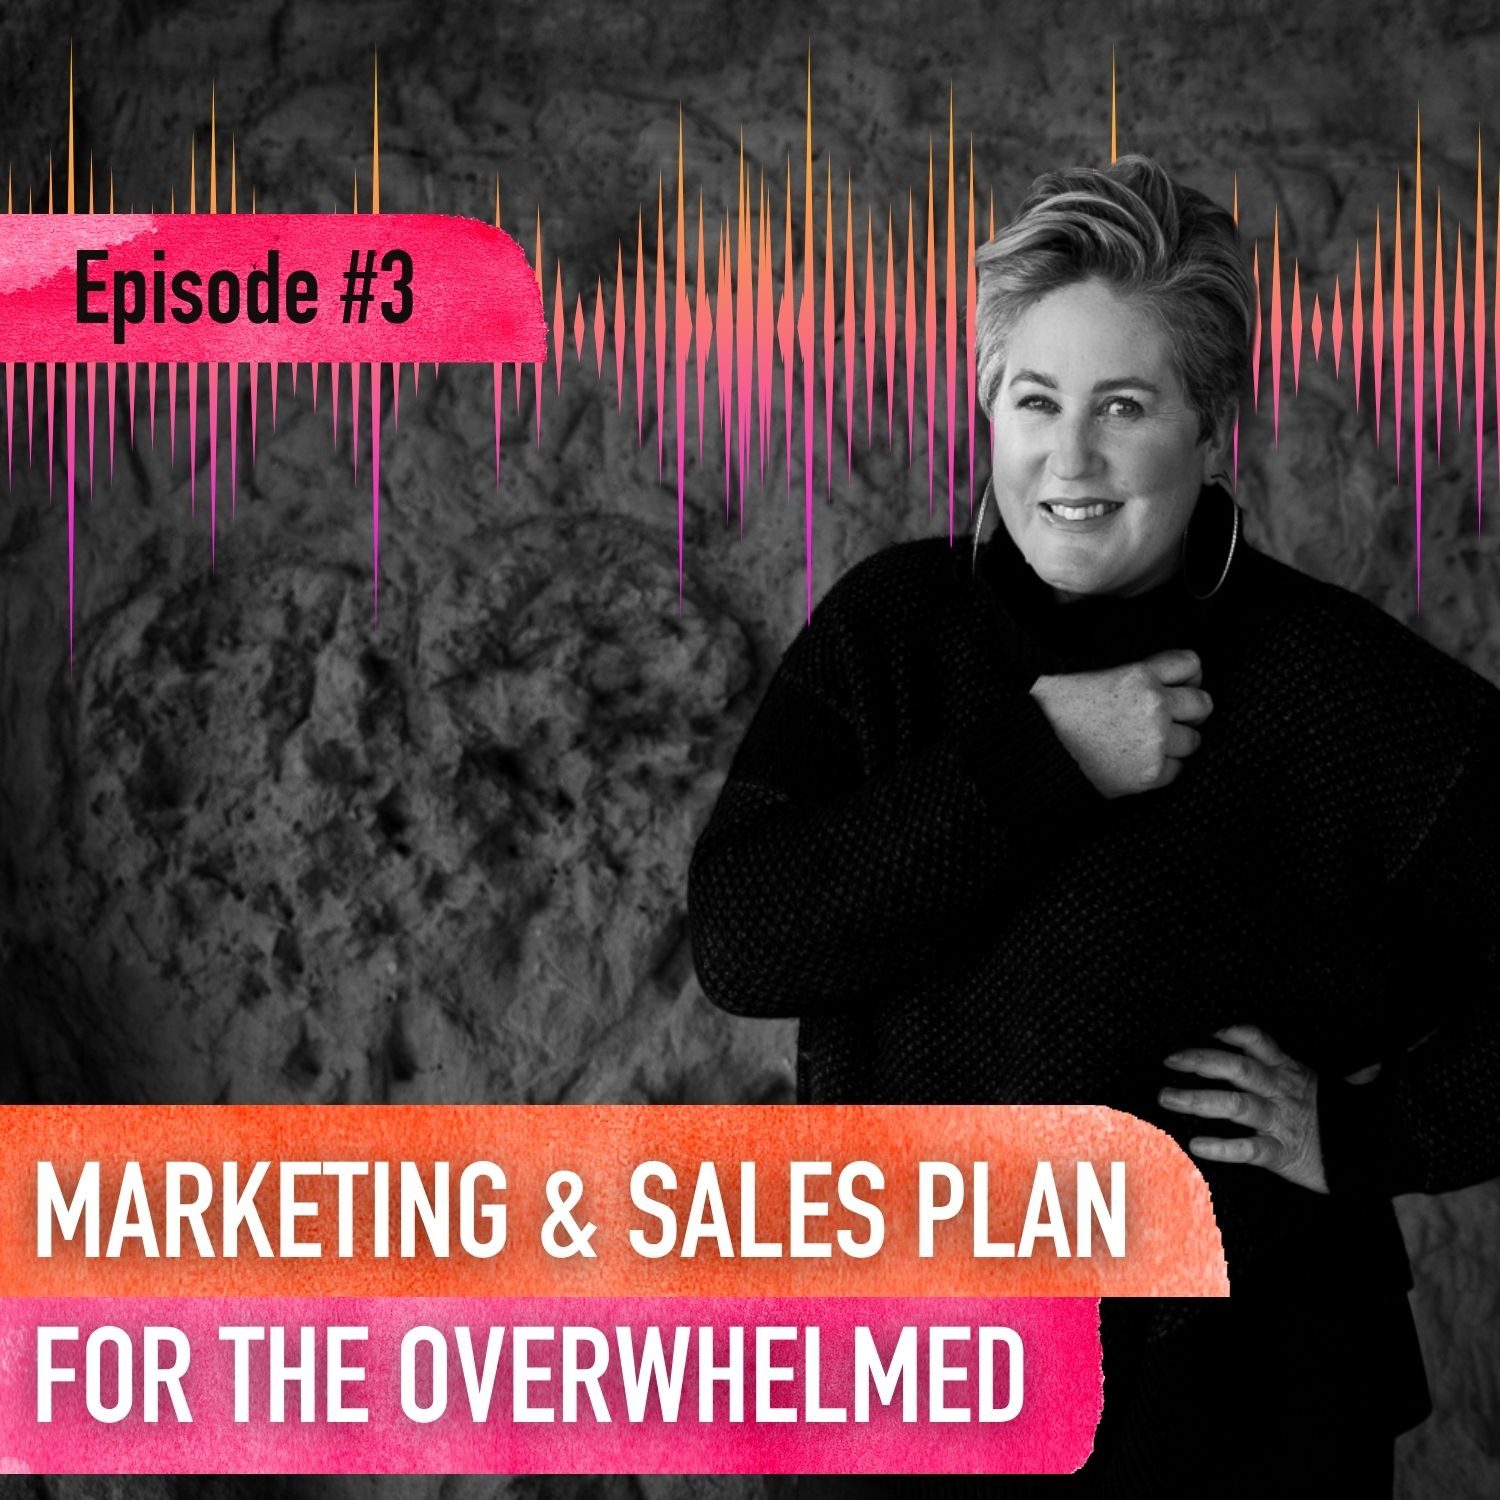 Marketing and sales plan for the overwhelmed - Natalie Tolhopf Podcast